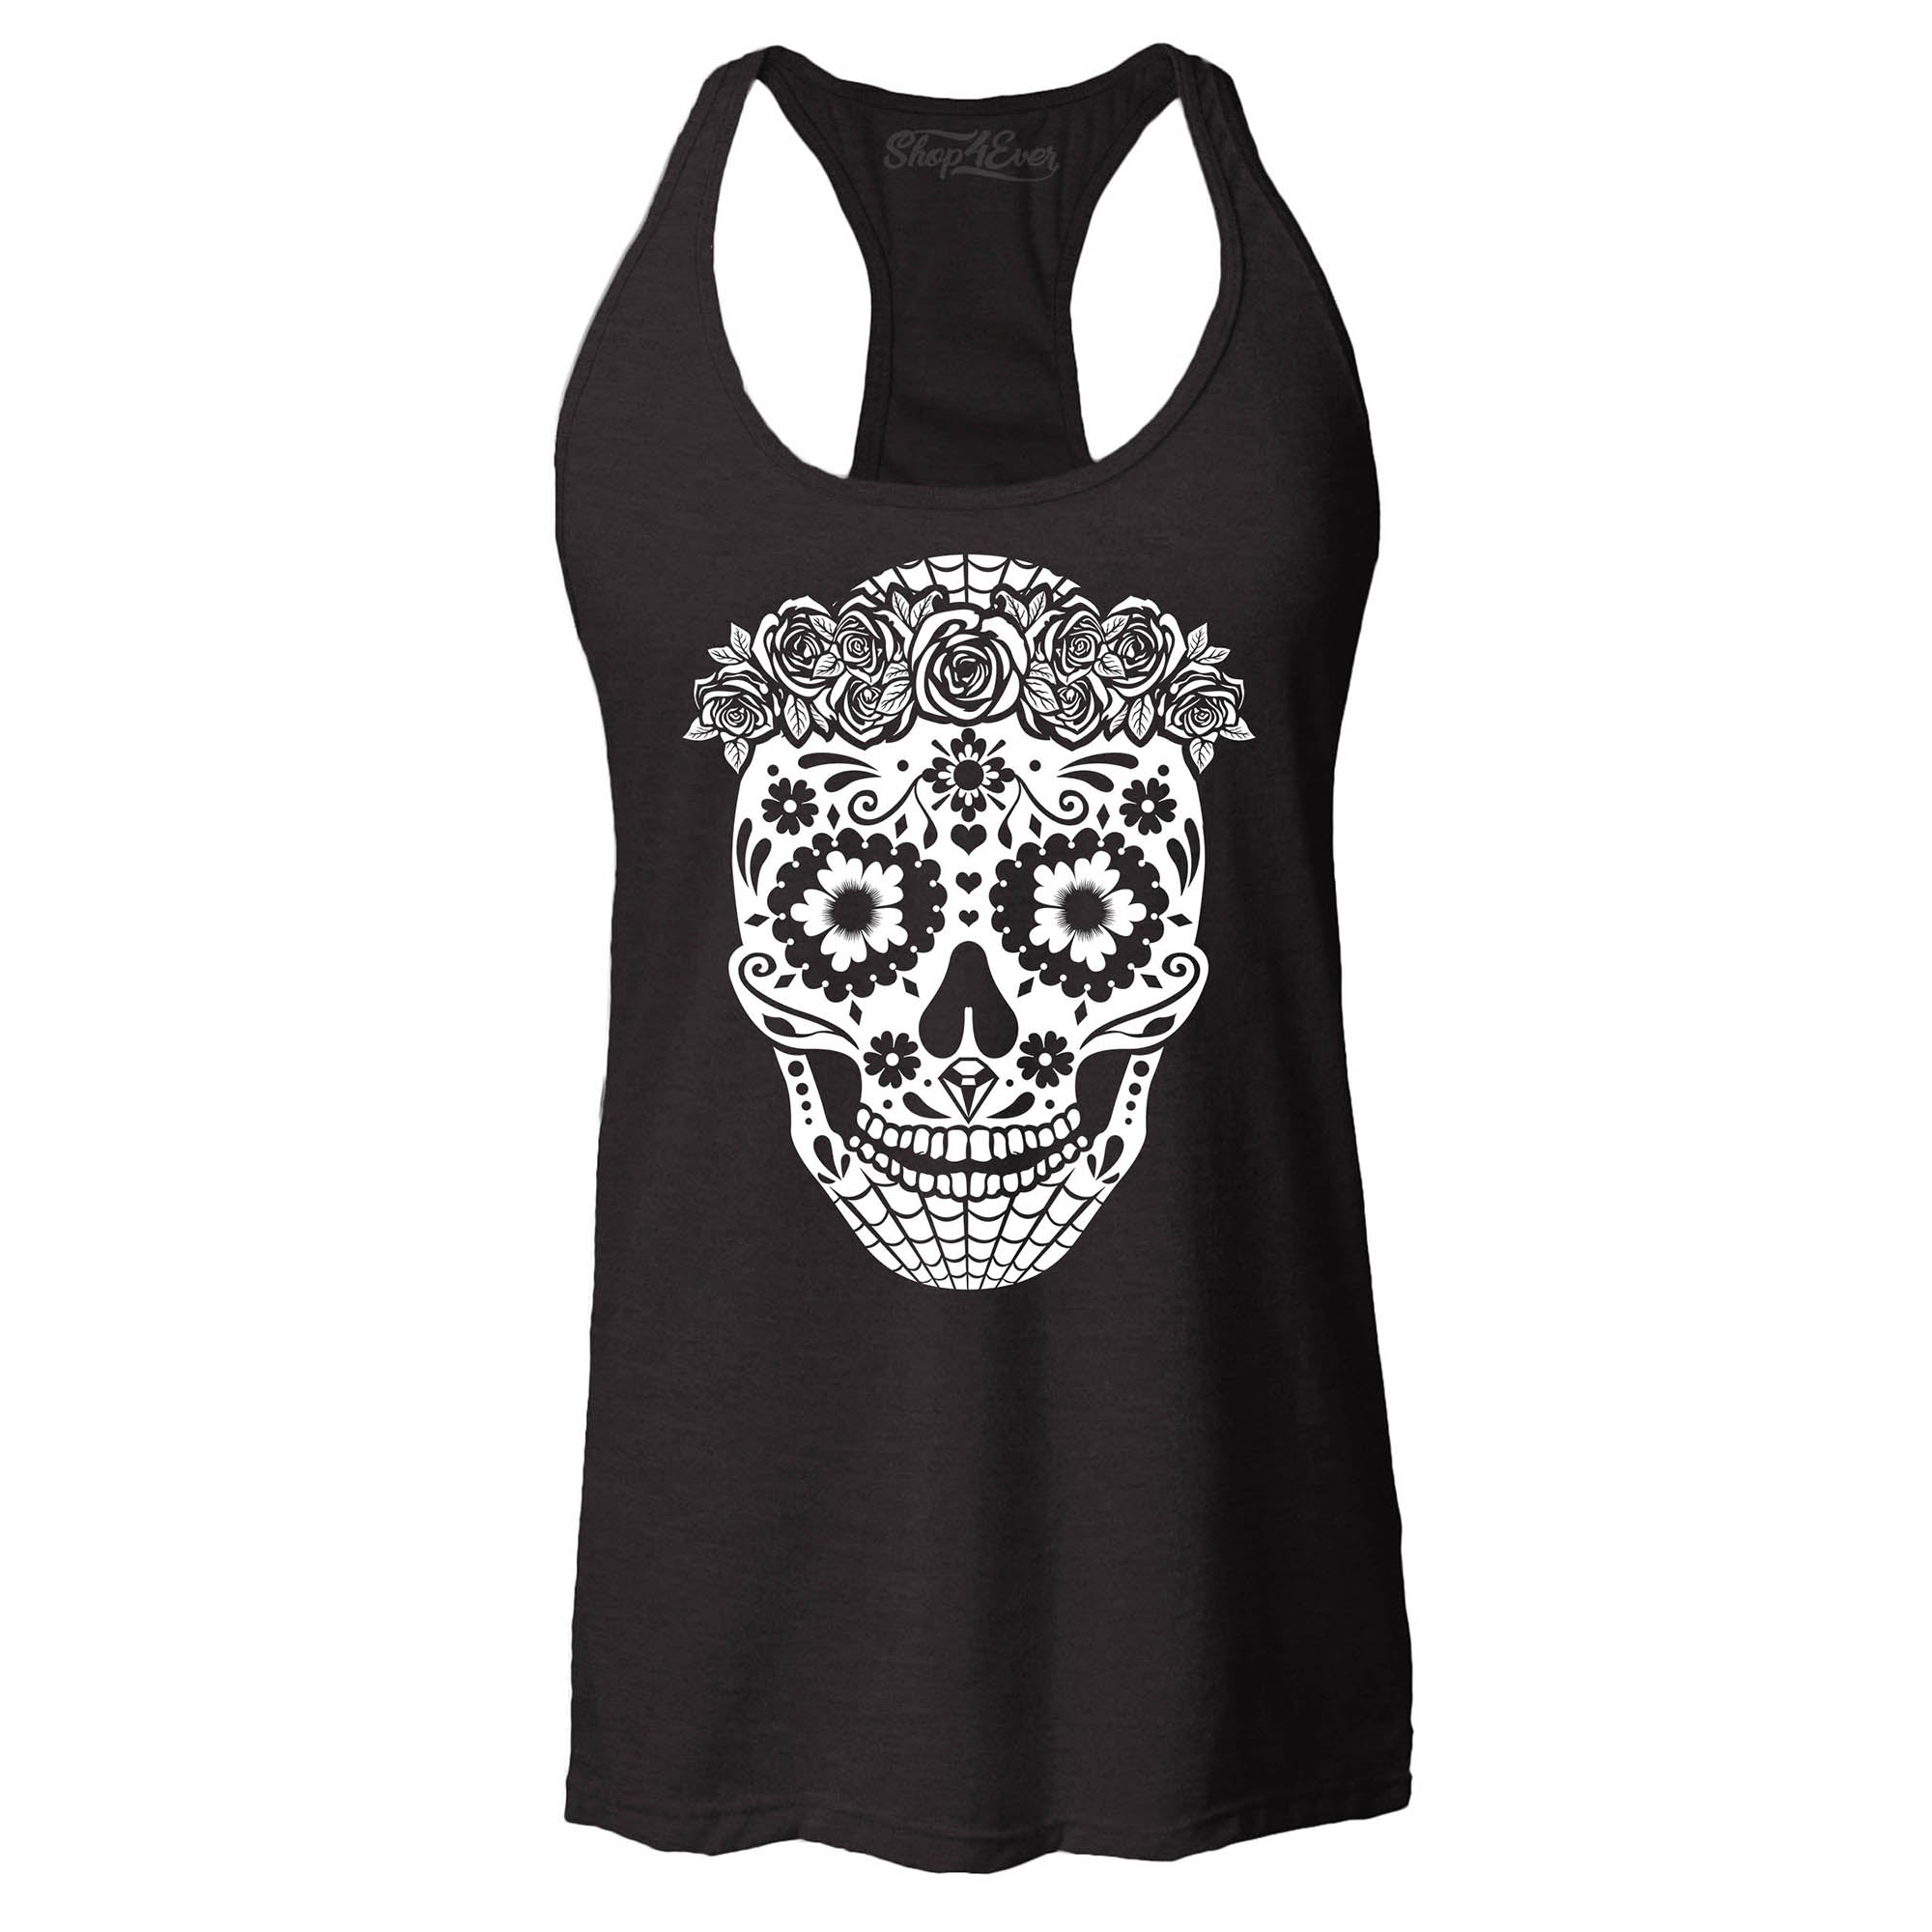 Floral Day of The Dead Girl Skull Women's Racerback Tank Top Slim Fit